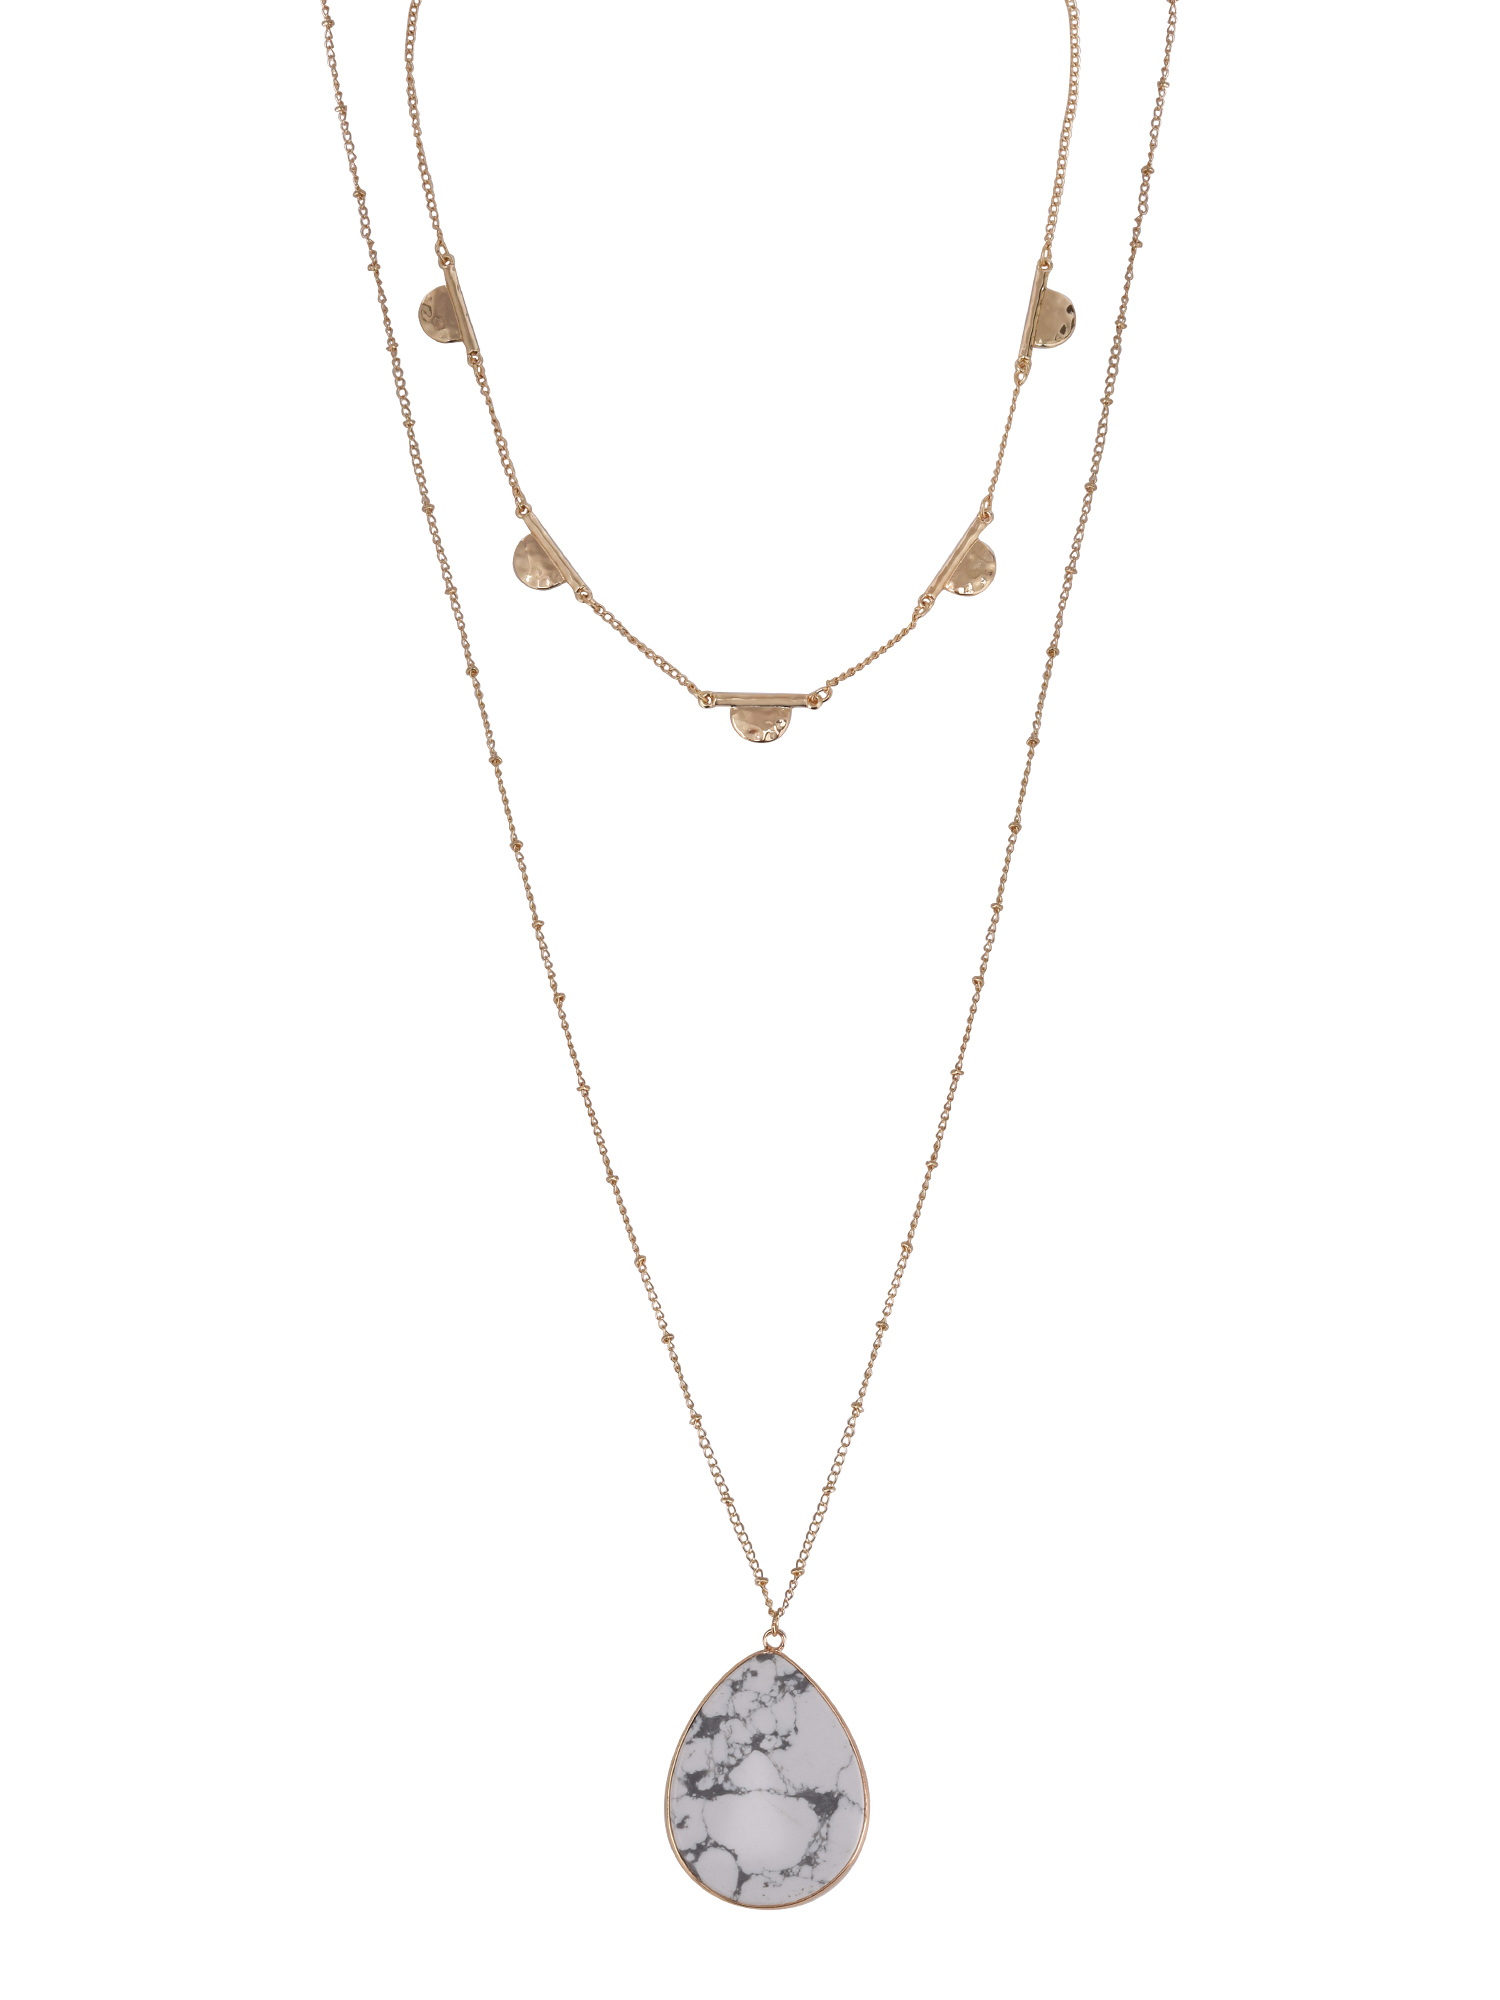 The Pioneer Woman - Women's Jewelry, Gold-tone Metal Frontal and Semi-precious Stone Pendant Necklace Set - image 1 of 6